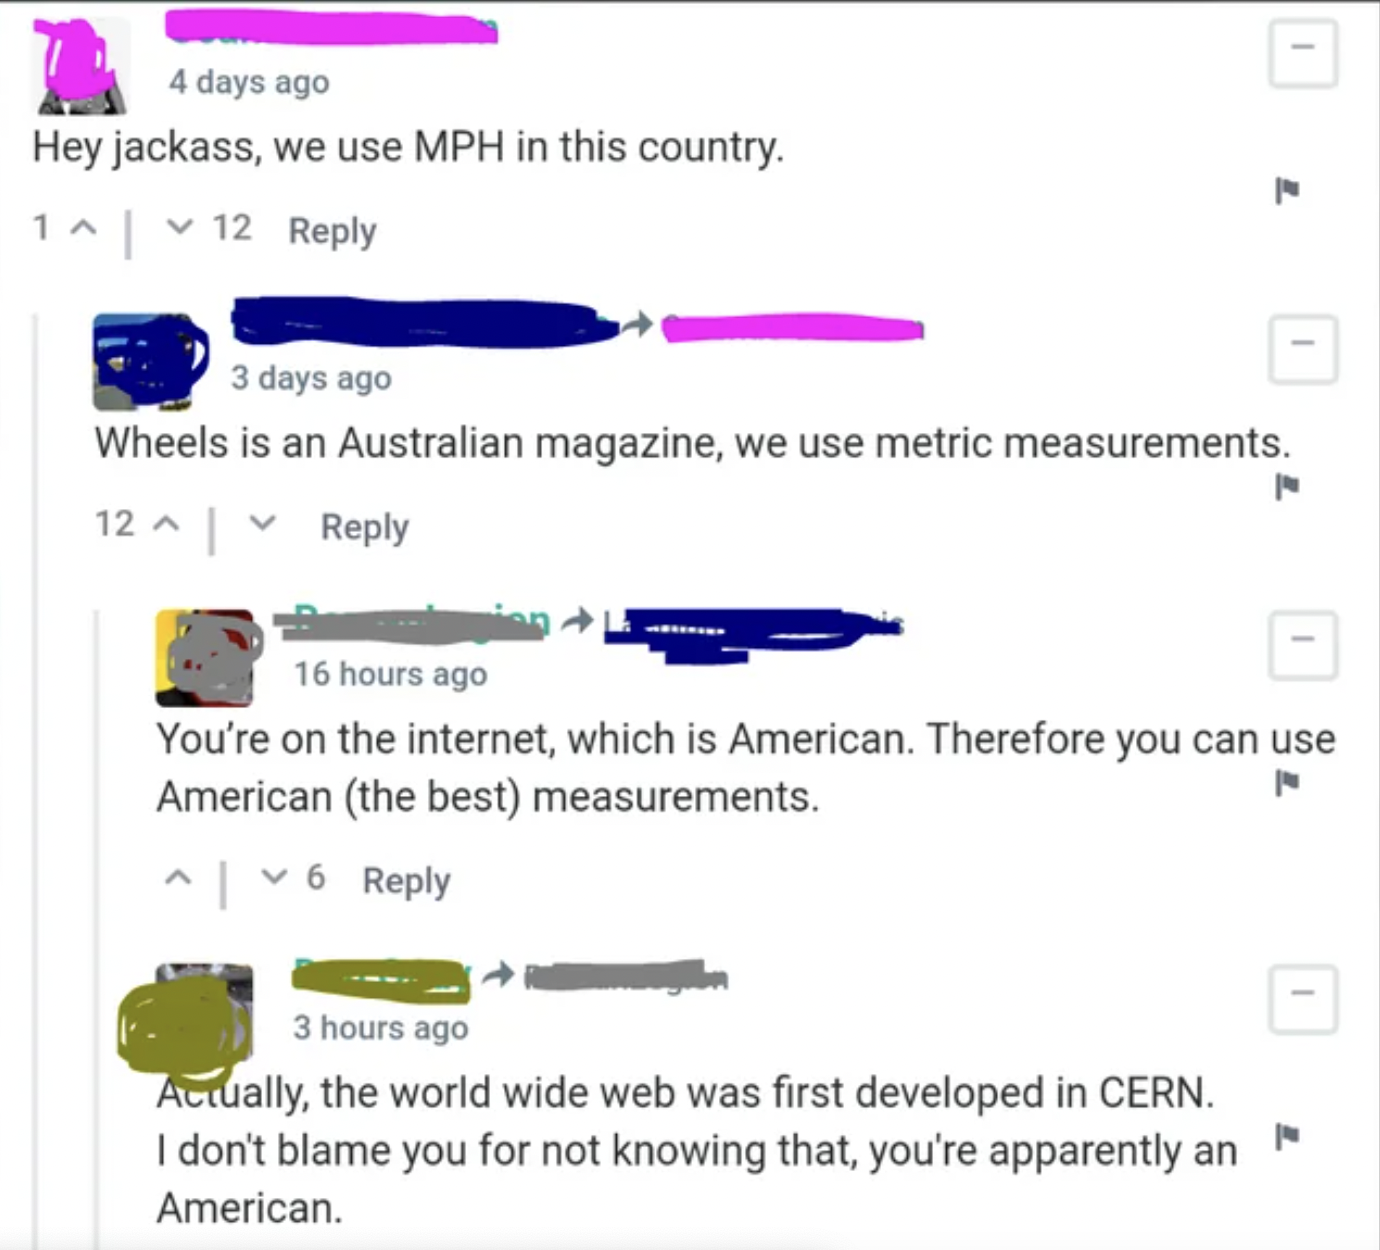 Trashy fails - Hey jackass, we use Mph in this country. on the internet, which is American. Therefore you can use American the best measurements.